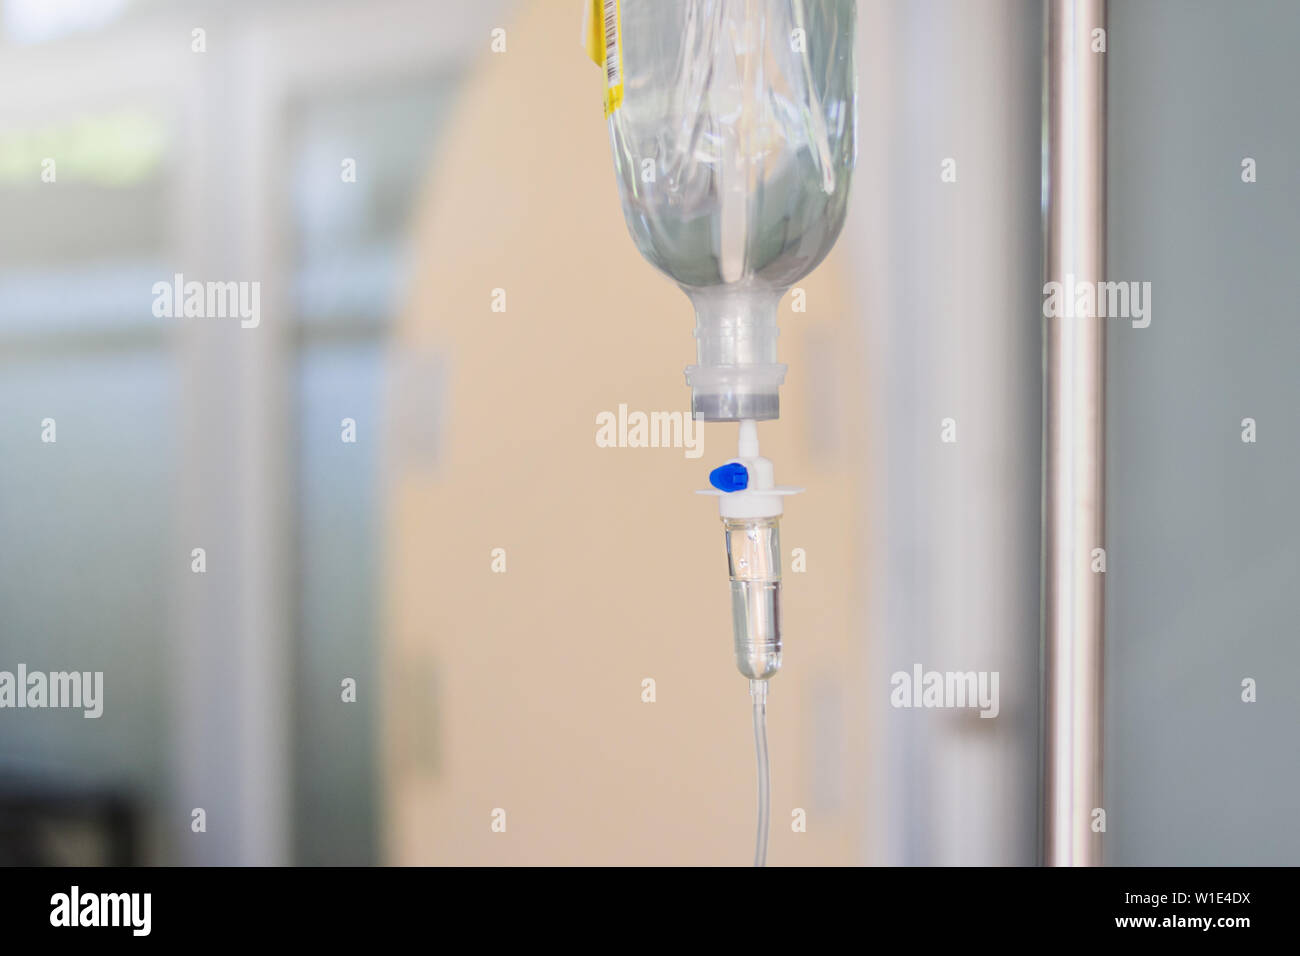 Intravenous therapy iv infusion set and bottle on a pole. Liquid saline is slowly dripping drops of drugs, medicine or antibiotic therapy and surgery Stock Photo